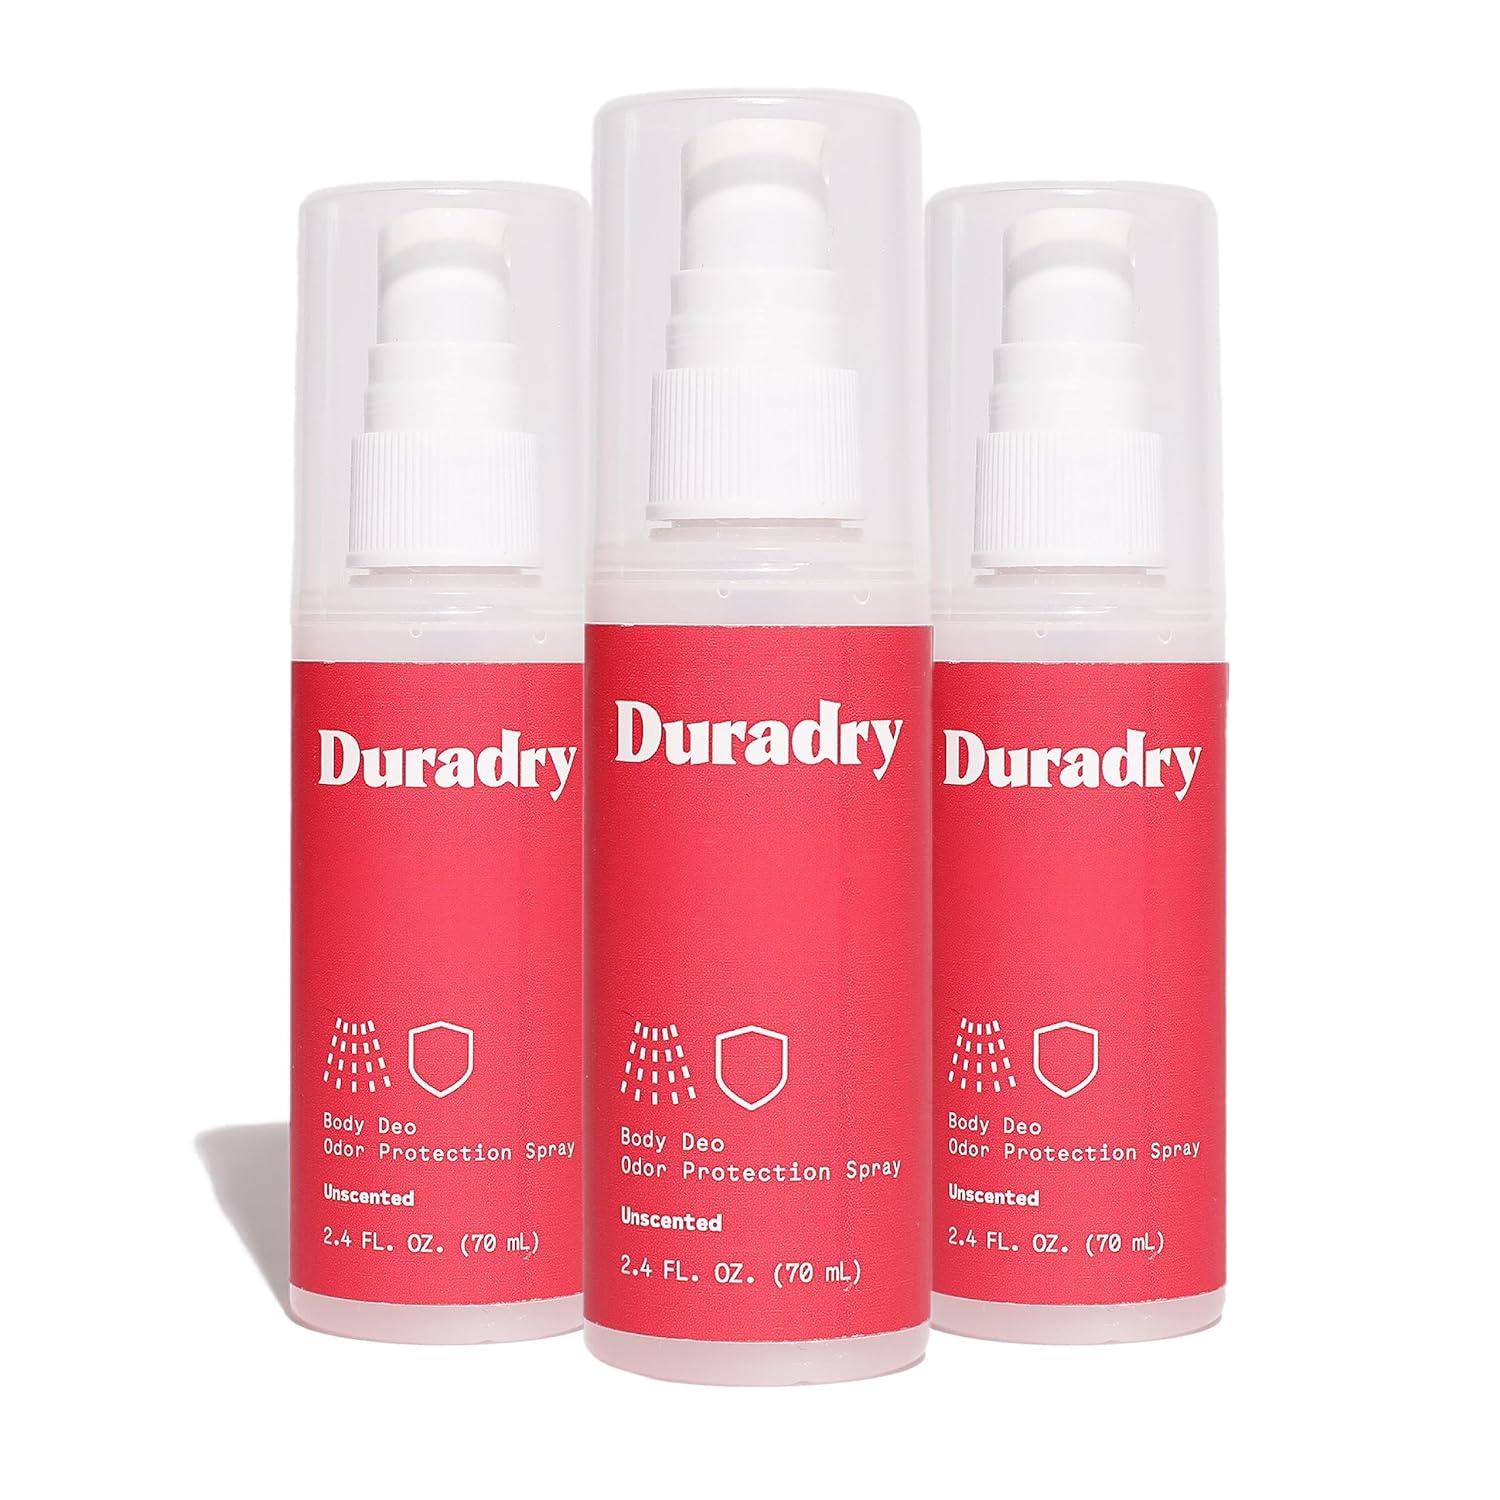 Duradry Body Deodorant Spray - Aluminum Free Deodorant, Prevent and Eliminate Any Body Odor Naturally - Unscented, 2.4 Fl Oz (Pack of 3)